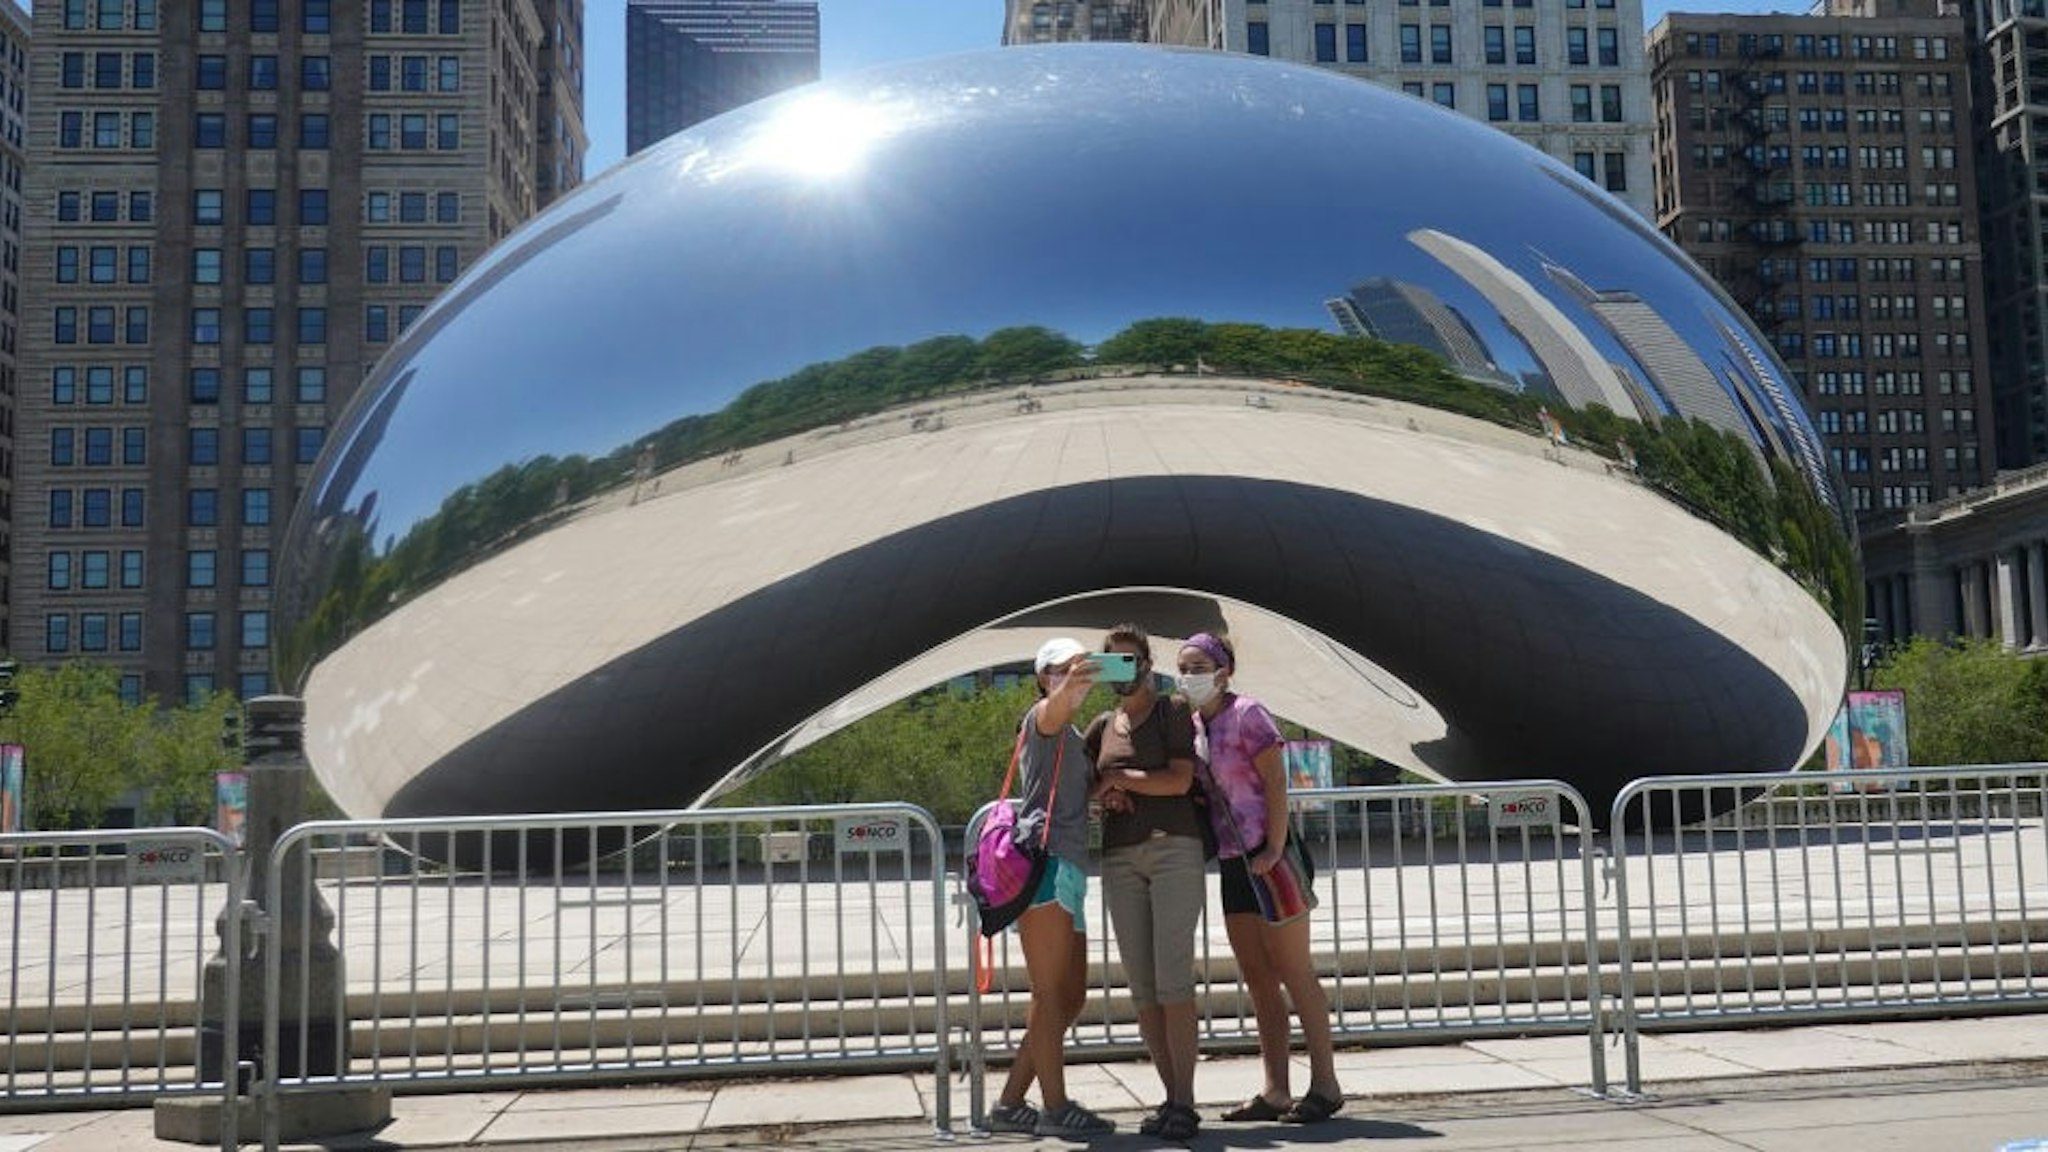 CHICAGO, ILLINOIS - JUNE 15: Visitors take pictures in front of the Cloud Gate sculpture in Millennium Park on June 15, 2020 in Chicago, Illinois. The park, which had been closed to visitors to help curtail the spread of the coronavirus COVID-19, partially reopened, with restrictions, to the public today. The park located in downtown Chicago is the most visited tourist attraction in the Midwest, attracting more than 12 million visitors annually. (Photo by